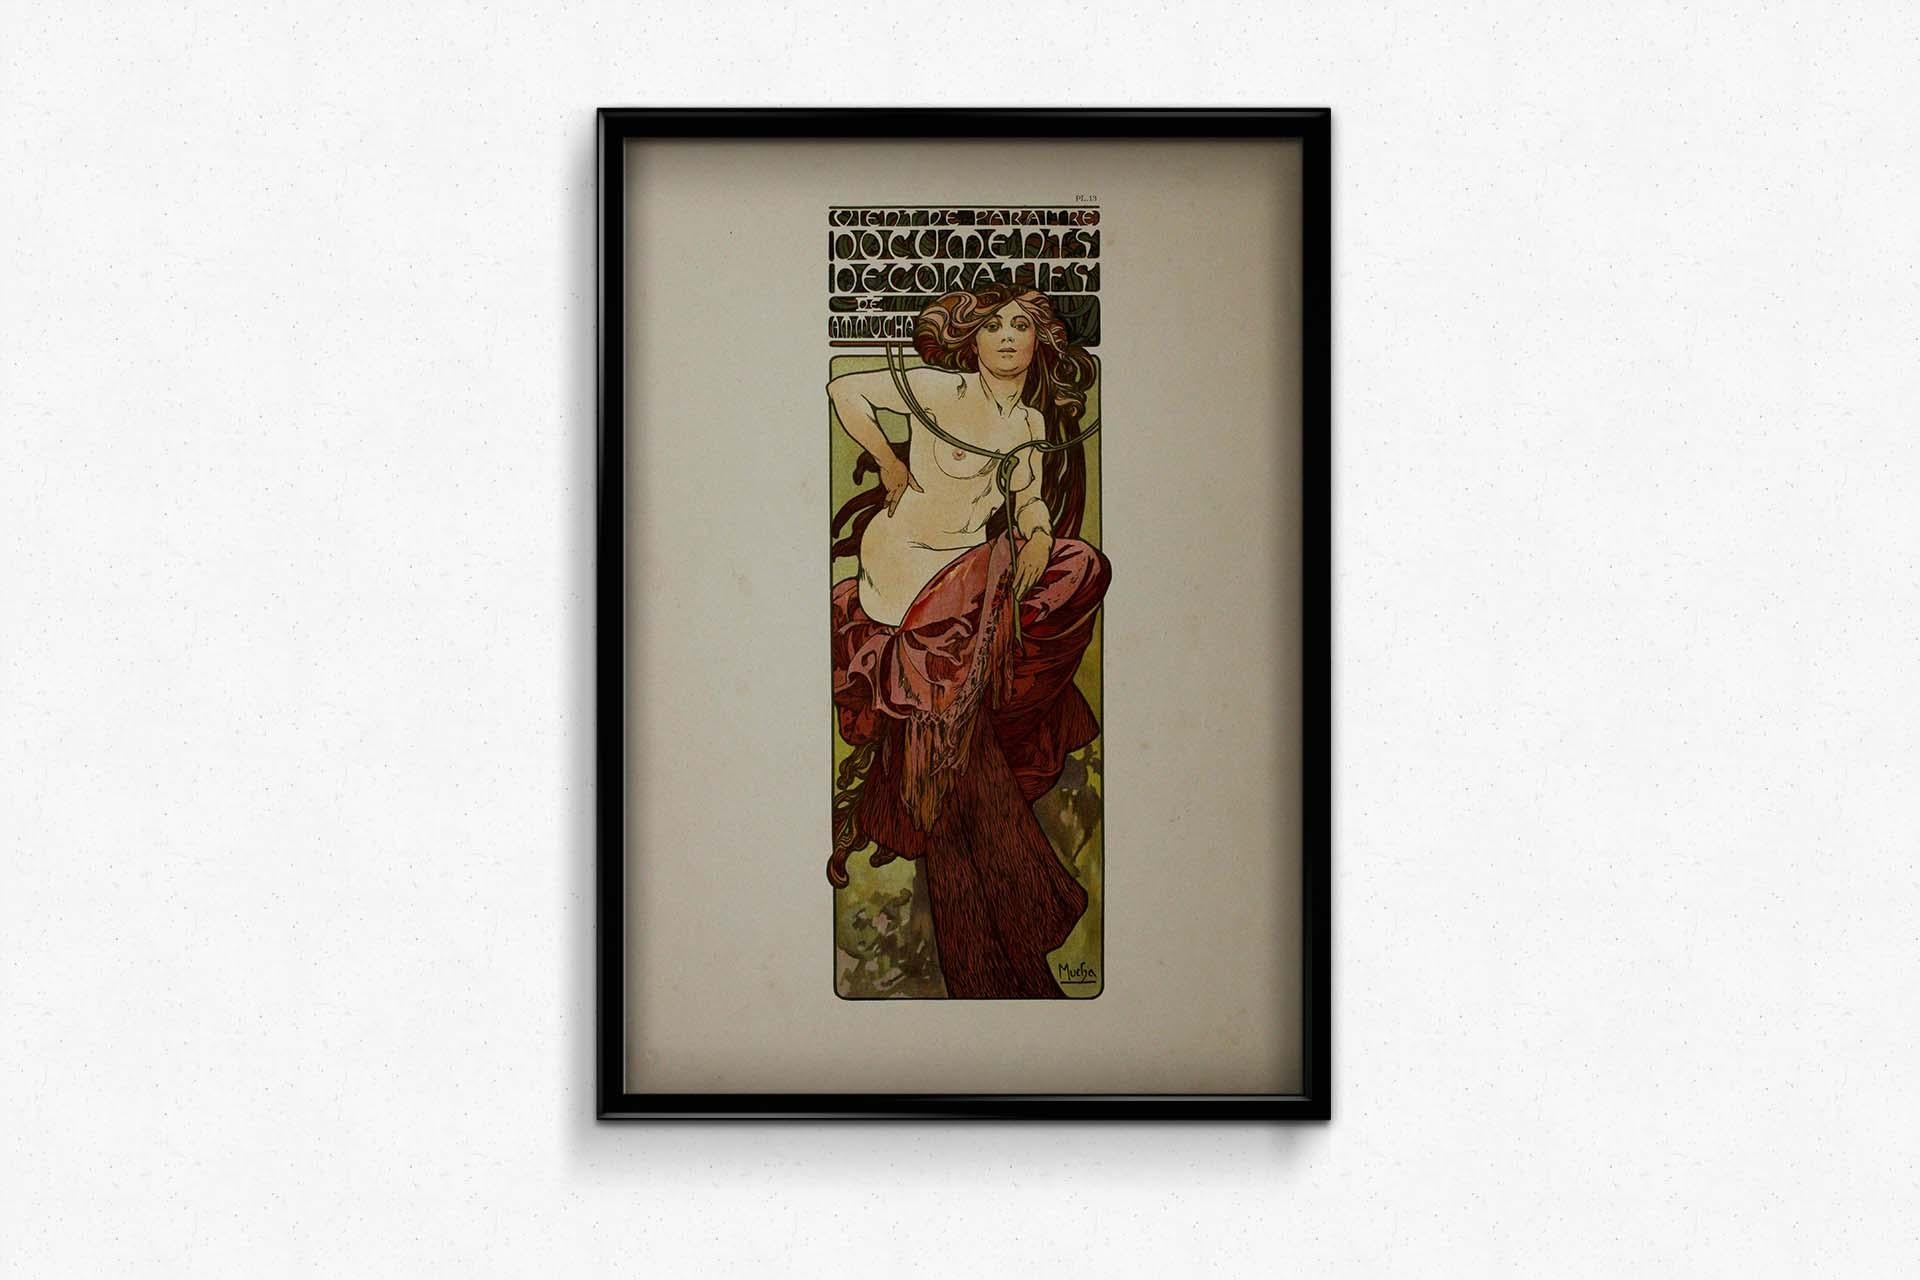 Alphonse Mucha's name shines like that of a visionary artist who left an indelible mark on the aesthetics of the early 20th century. The year 1902 saw the publication of 